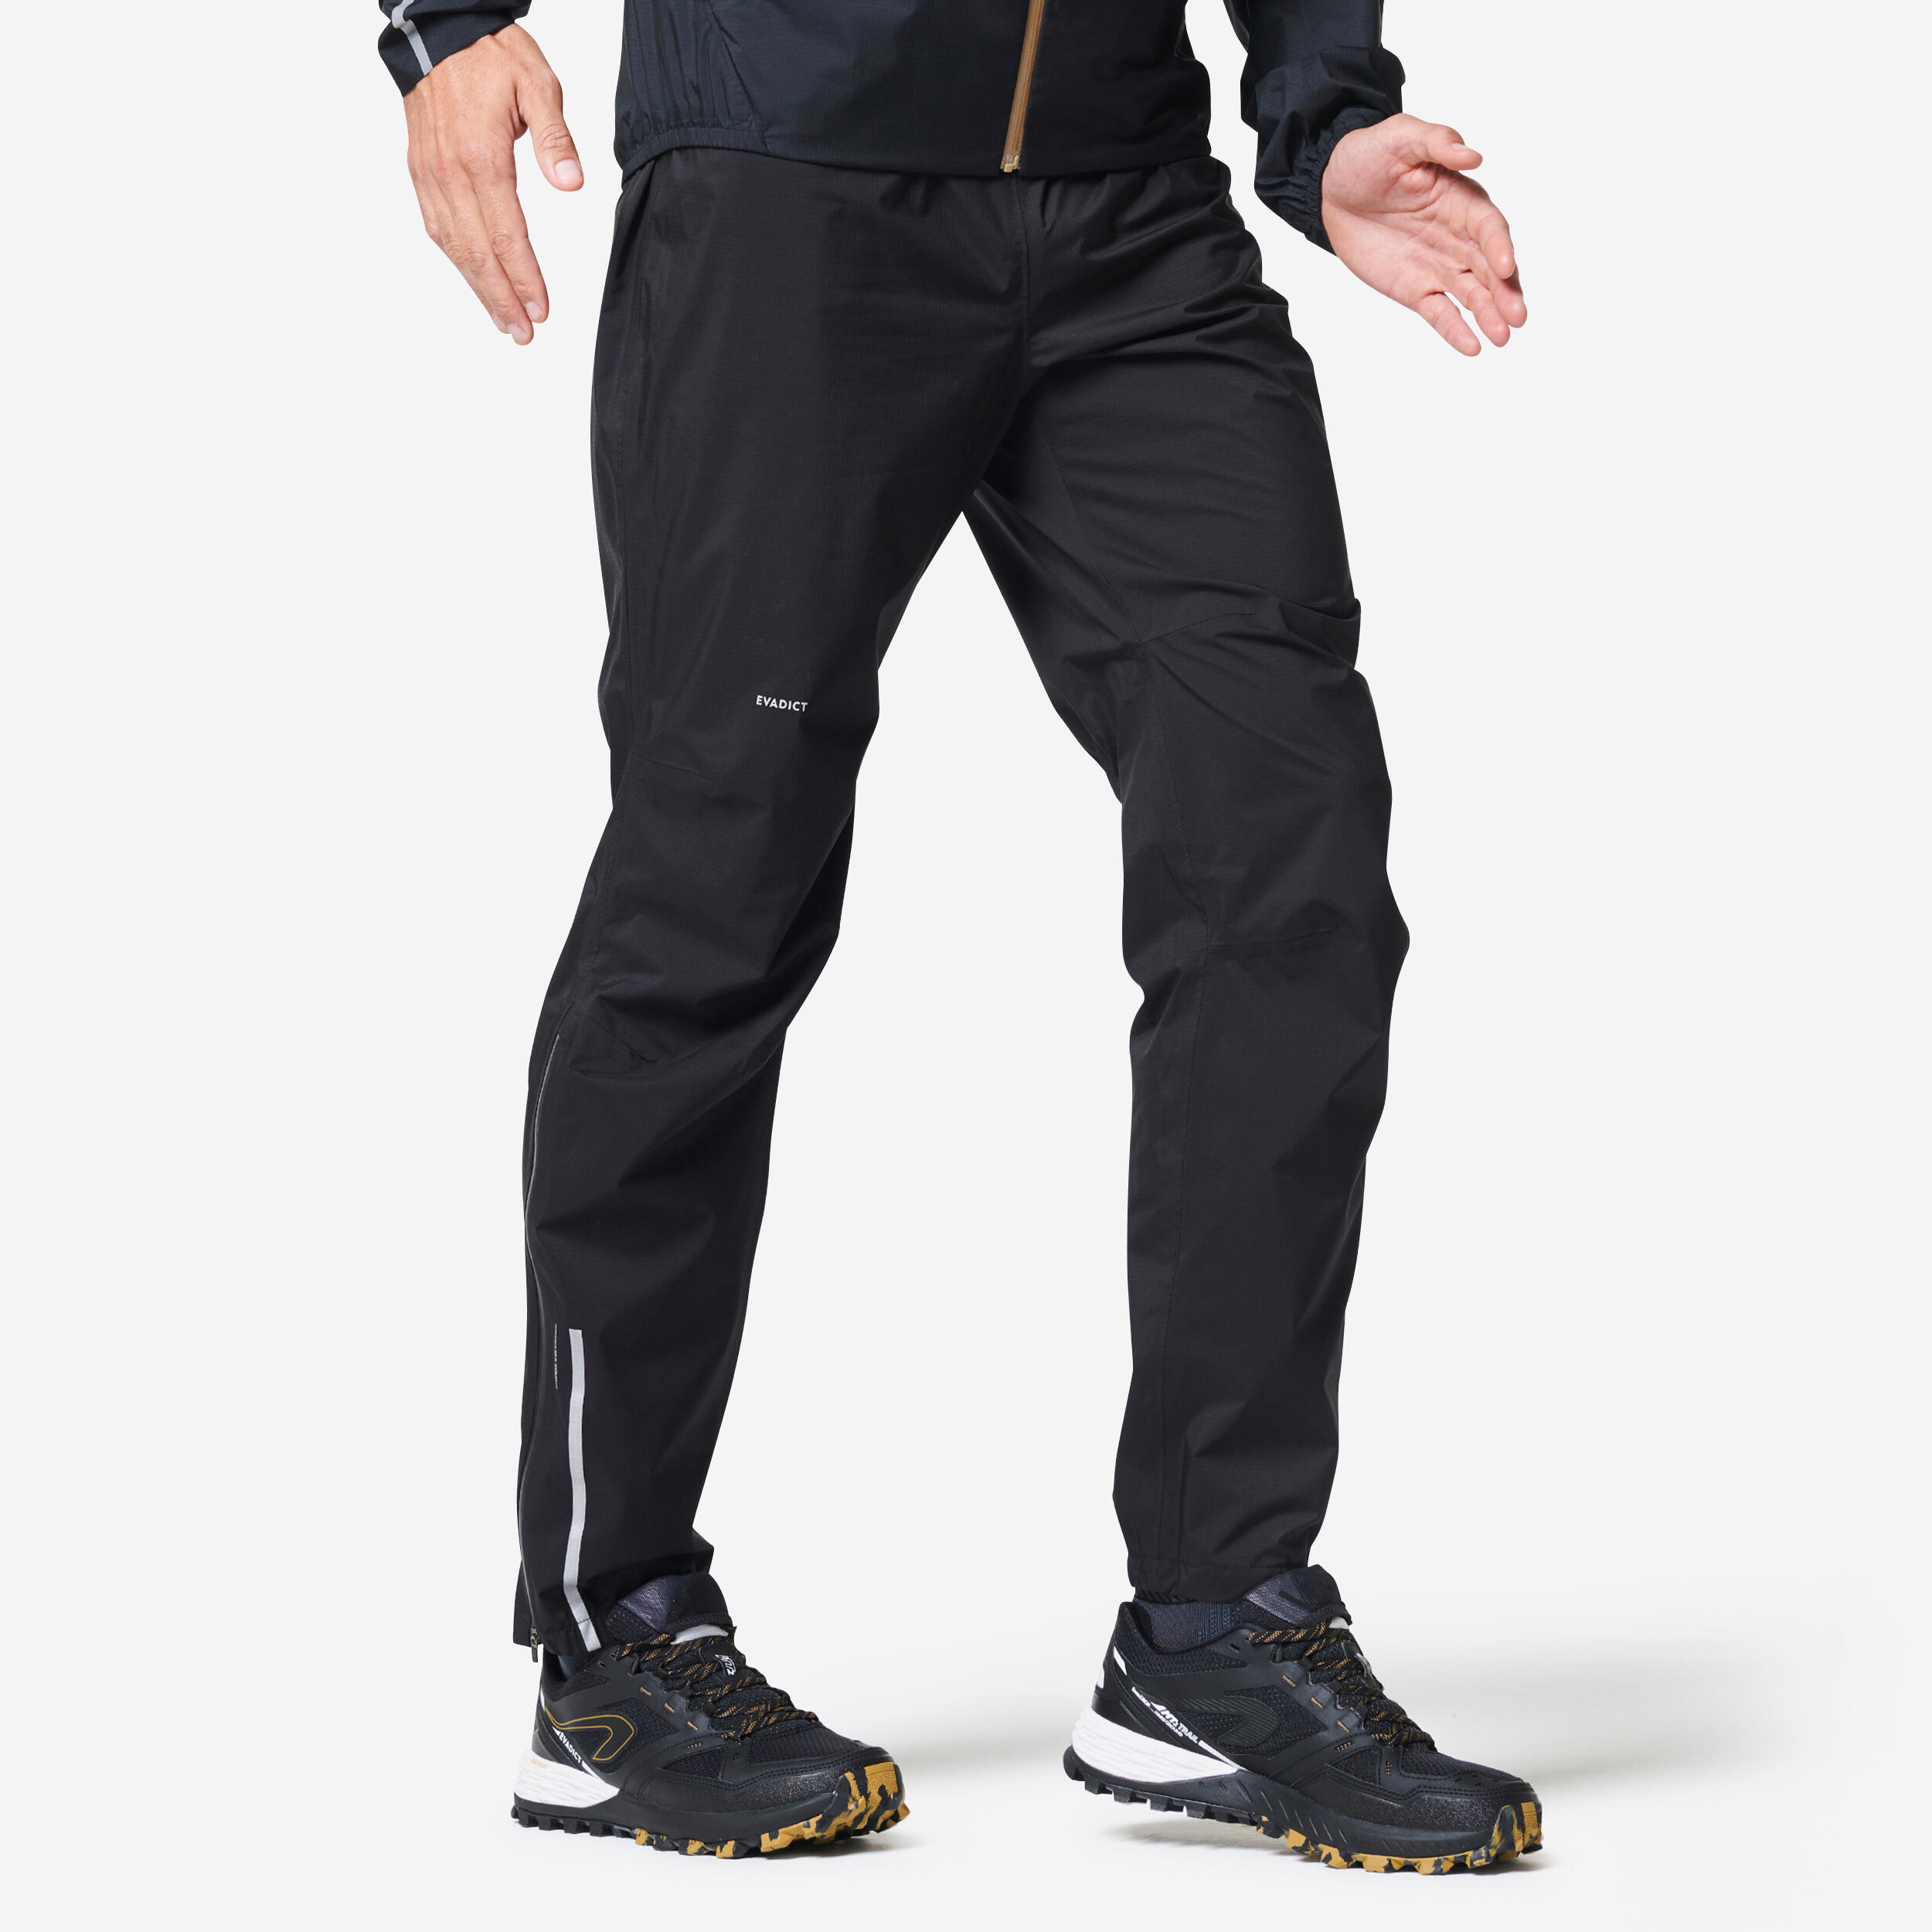 Men's Foray GORE-TEX® Pants | Outdoor Research